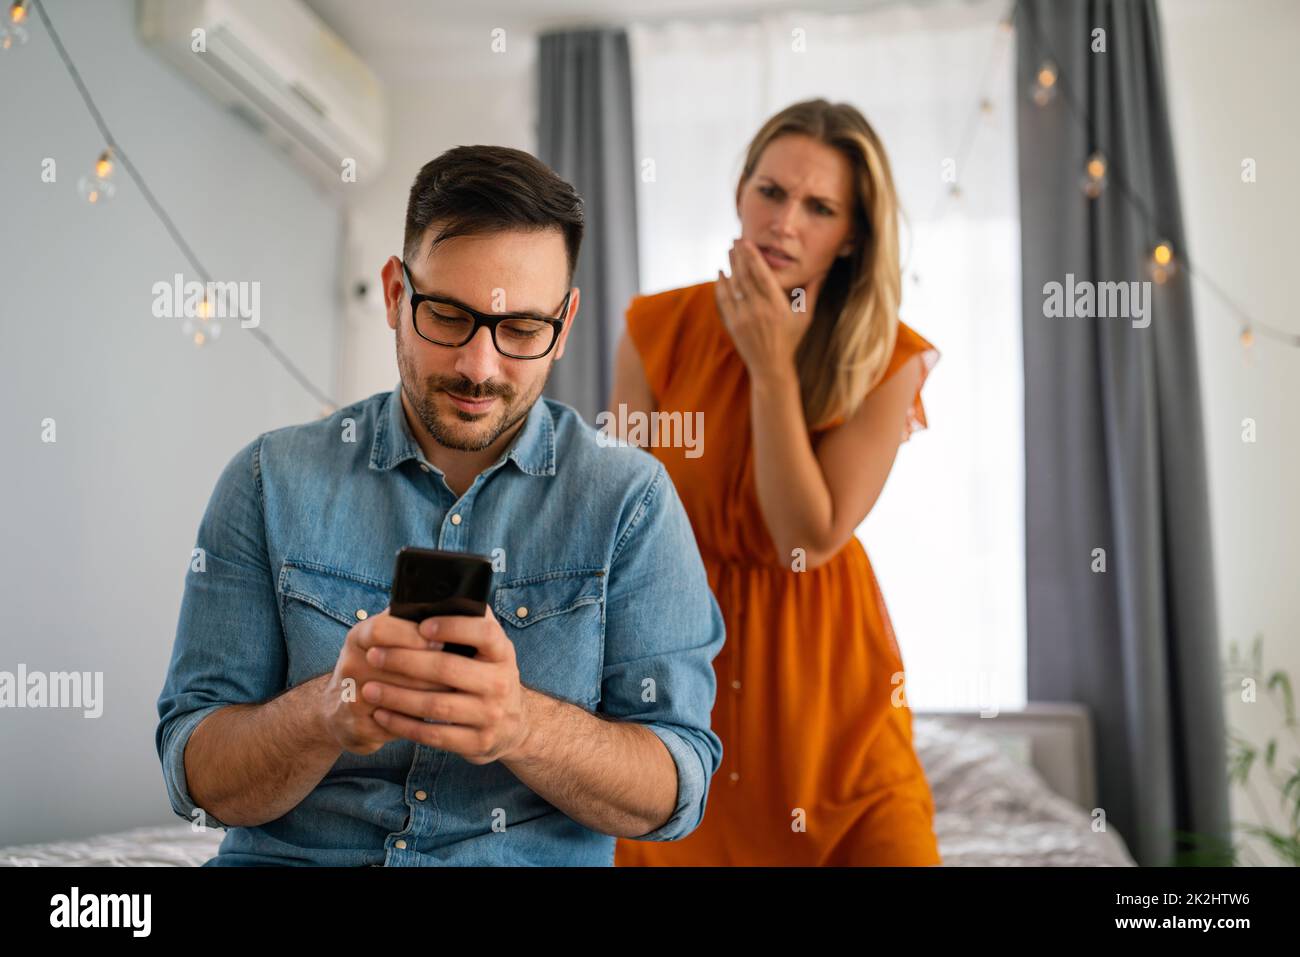 Jealous woman spying boyfriend and watching his mobile phone. Couple cheating jealousy concept Stock Photo